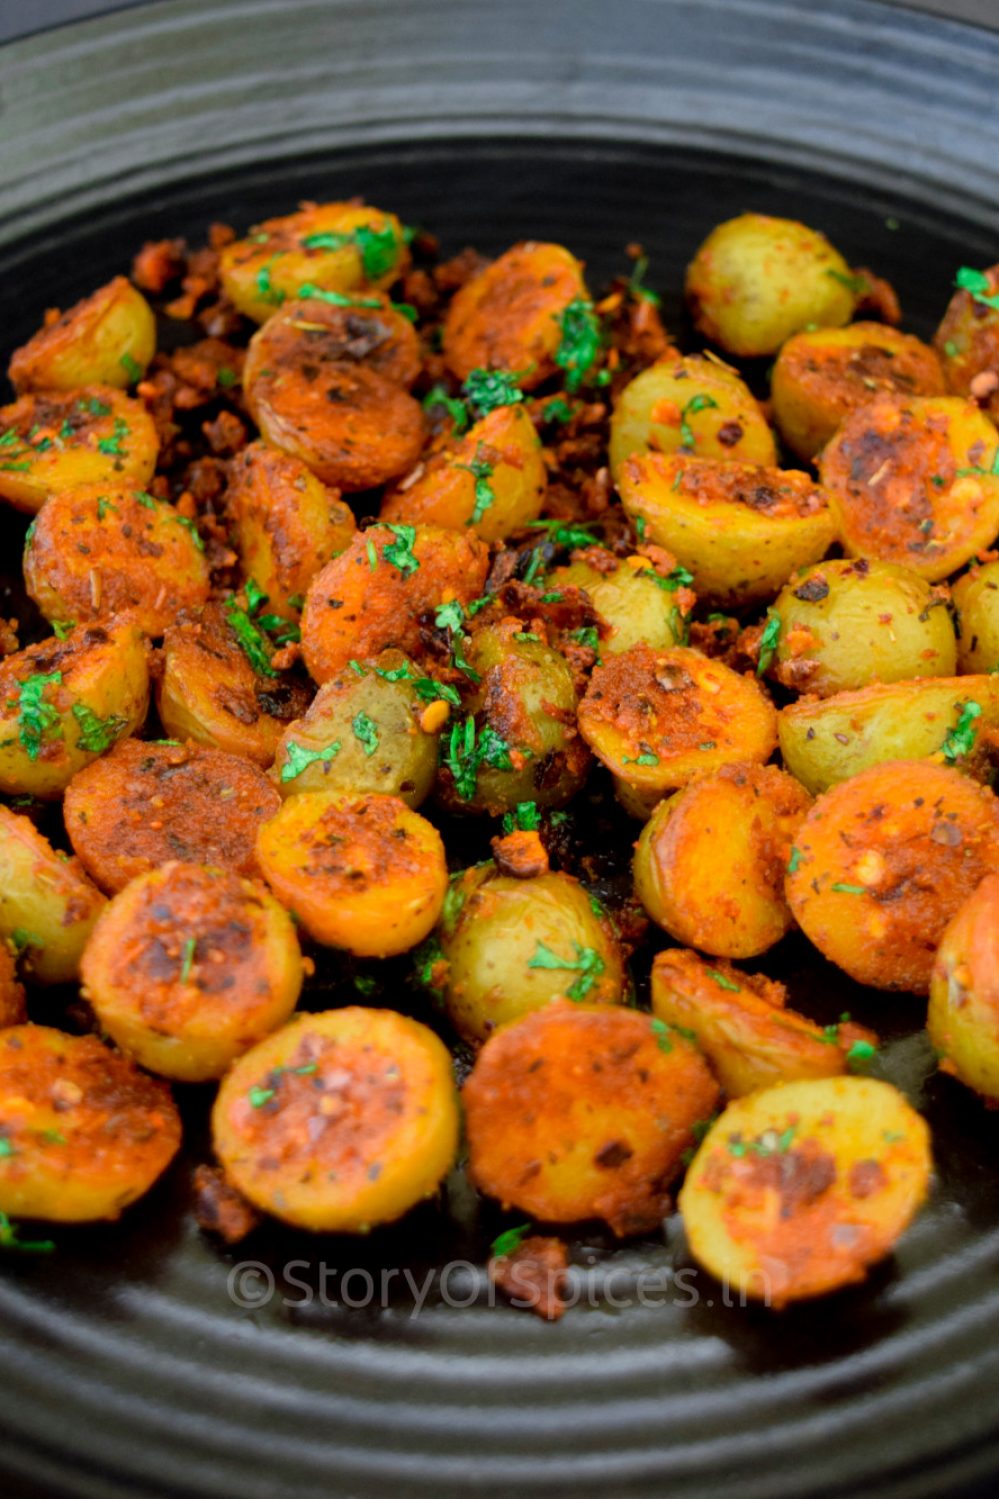 Roasted-Garlic-Potatoes-Story-of-spices